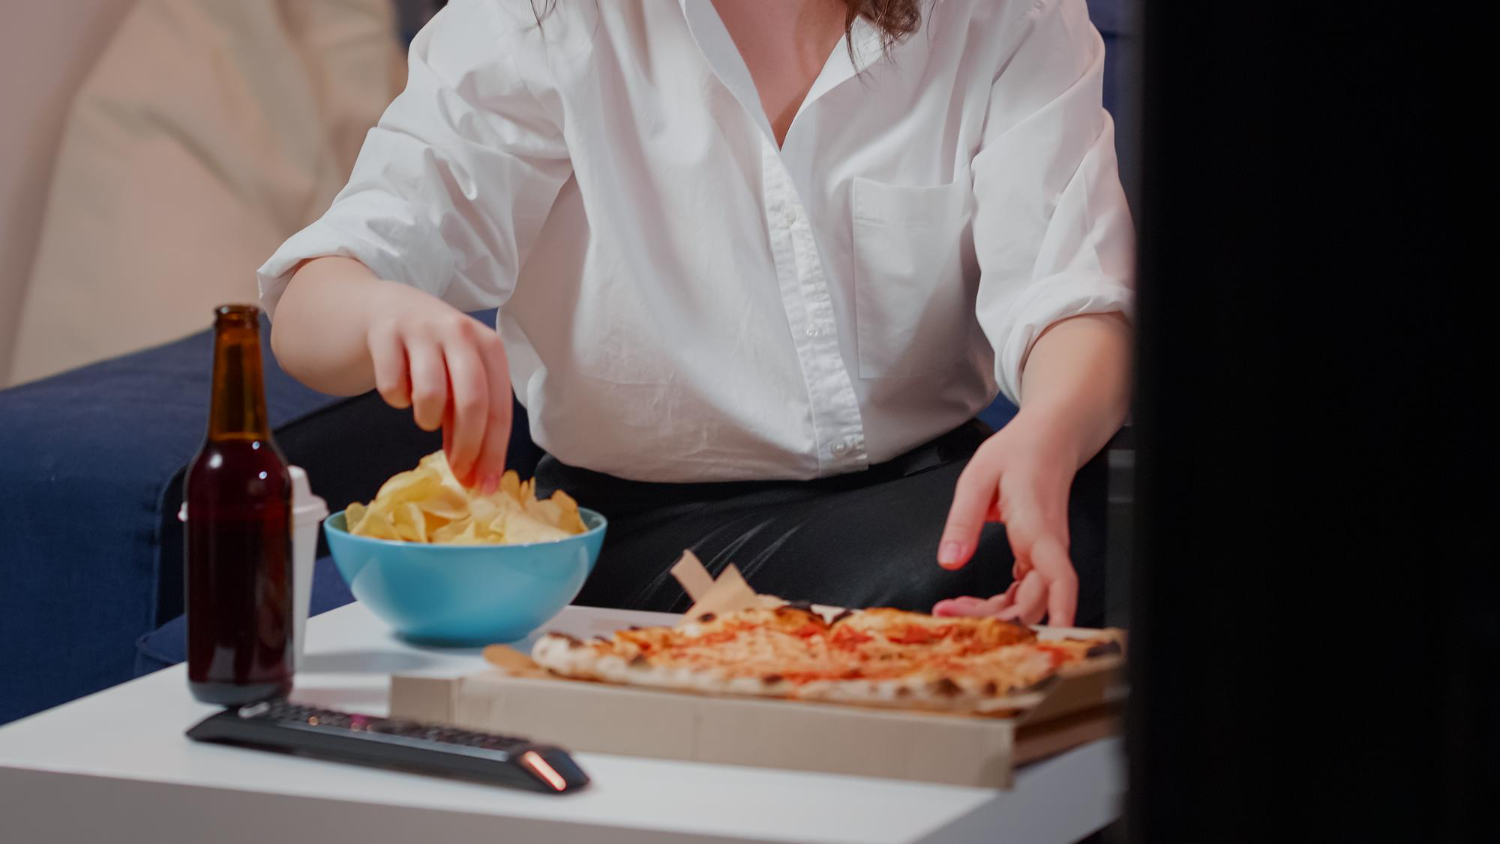 woman-placing-box-pizza-table-while-having-beverages-bowl-chips.